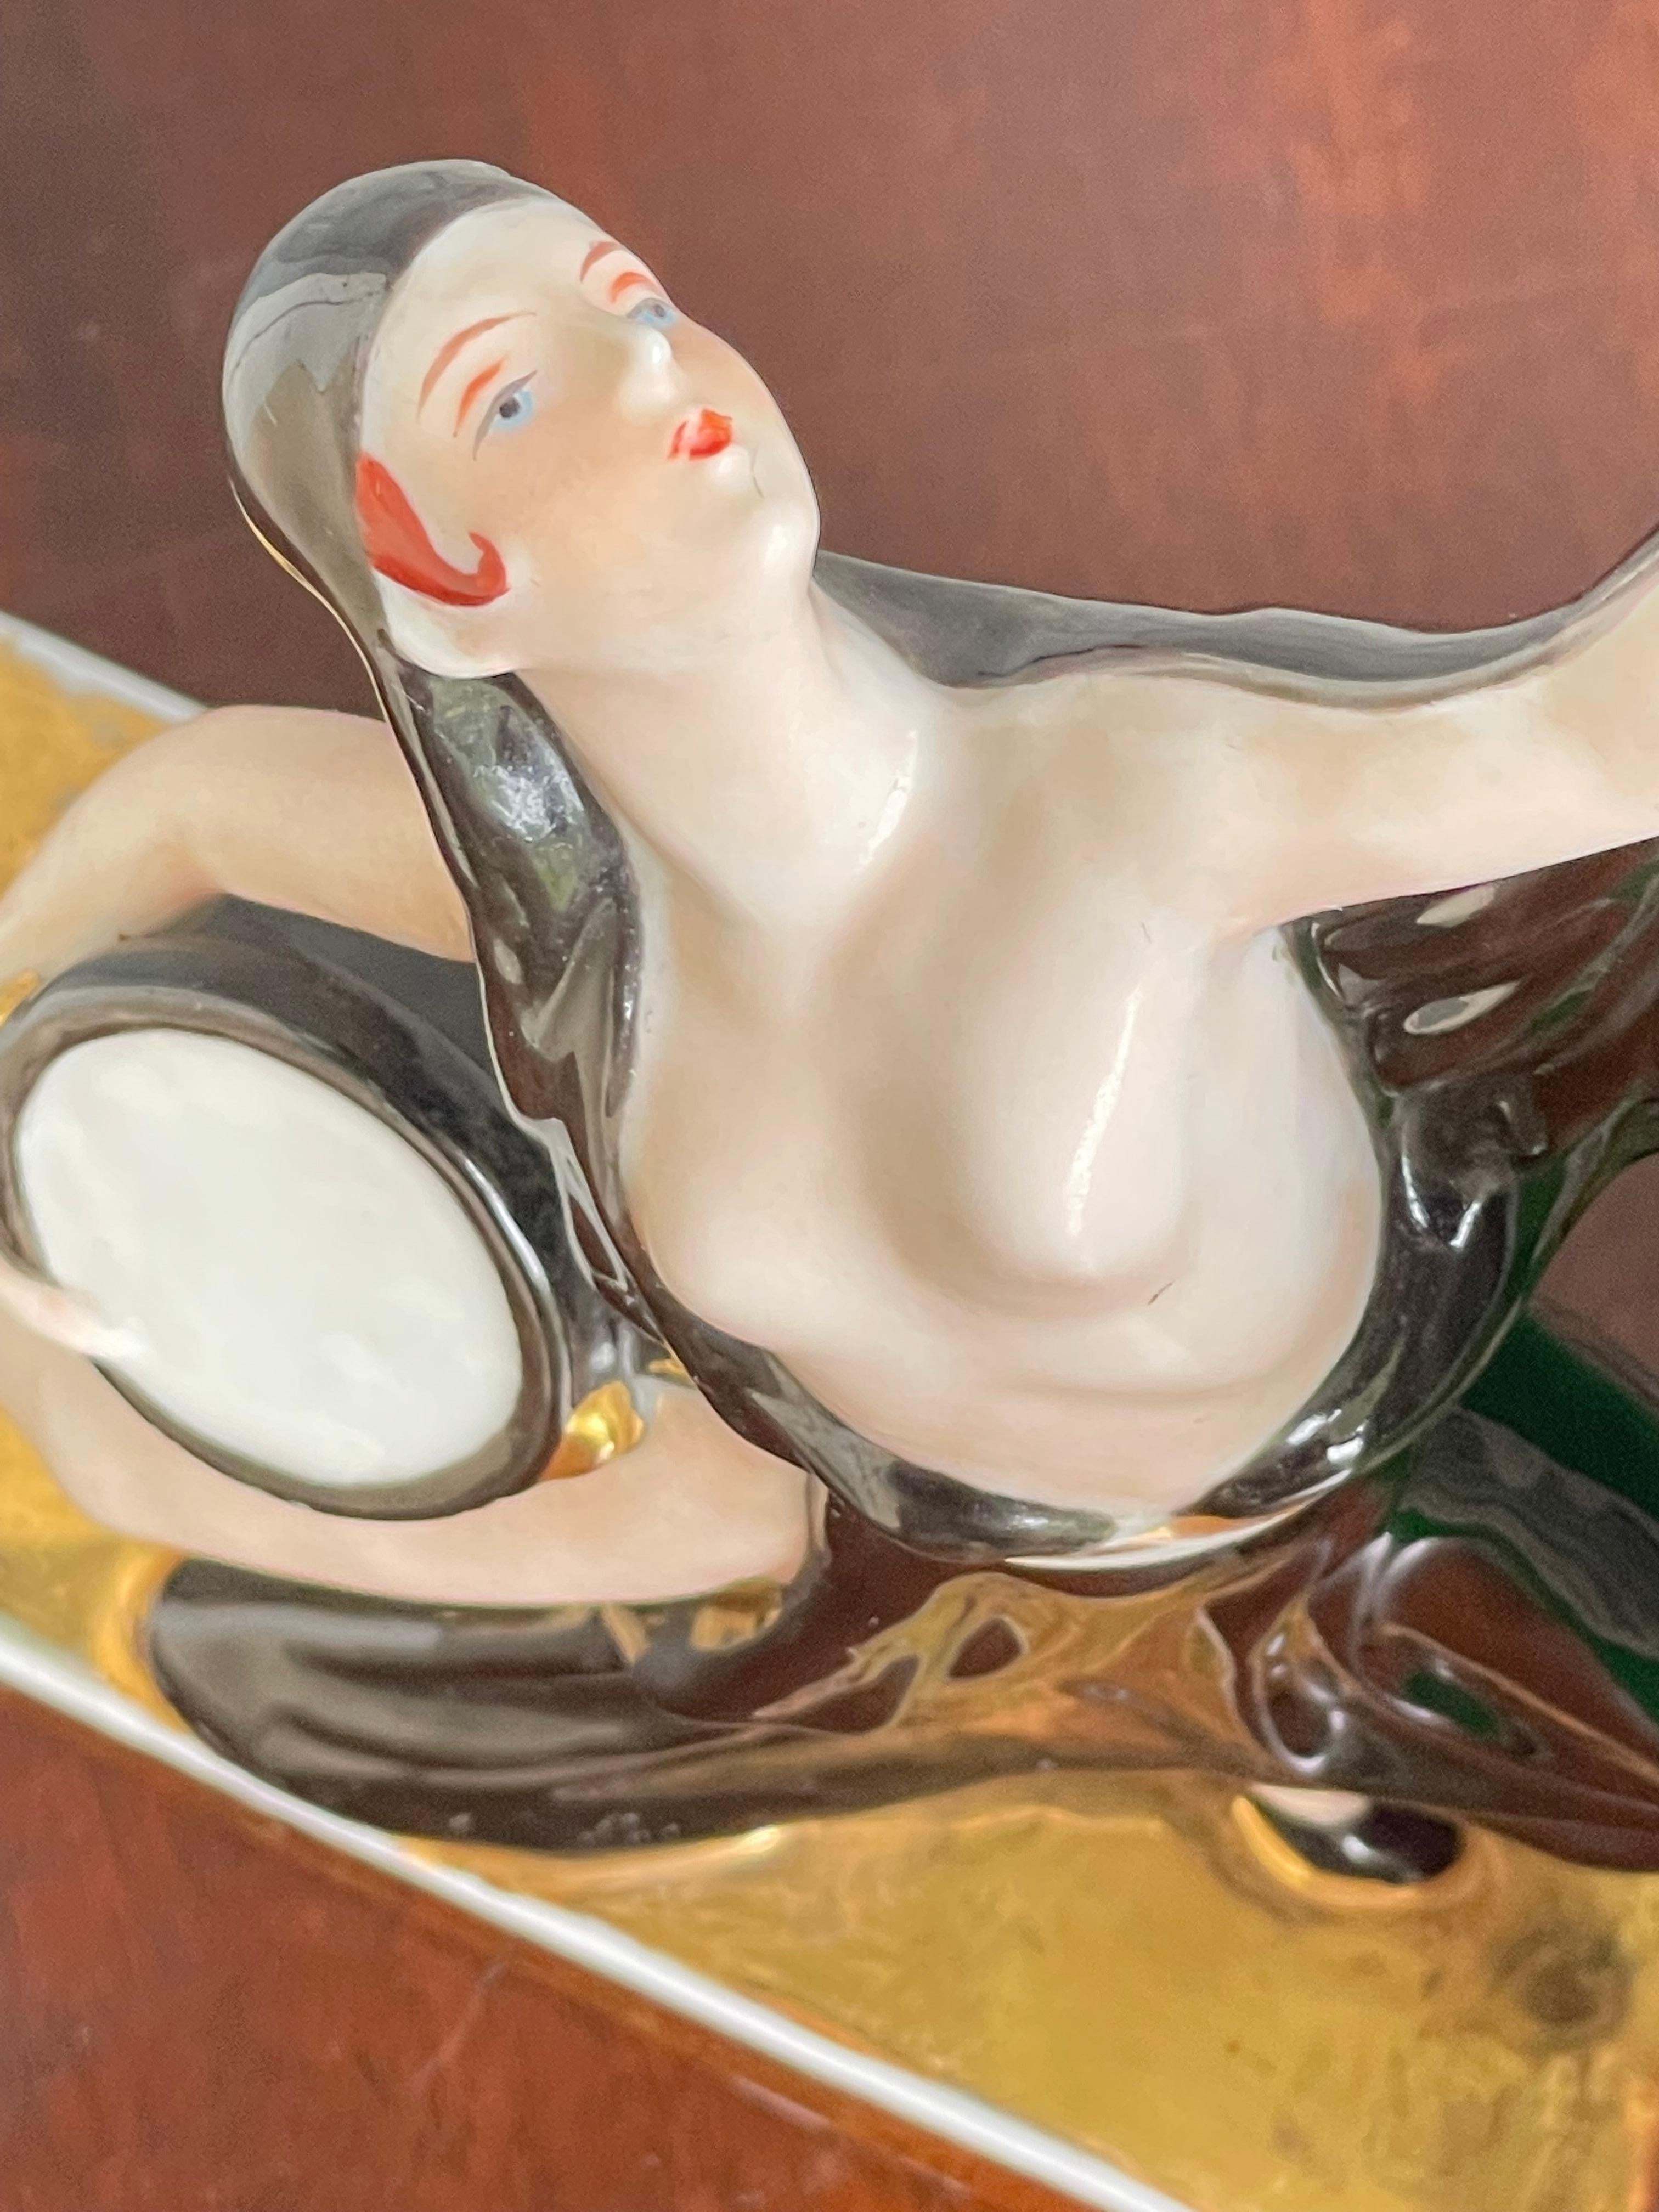 Rare & Stylish Pair of 1920s Porcelain French Art Deco Risque Dancer Bookends For Sale 3